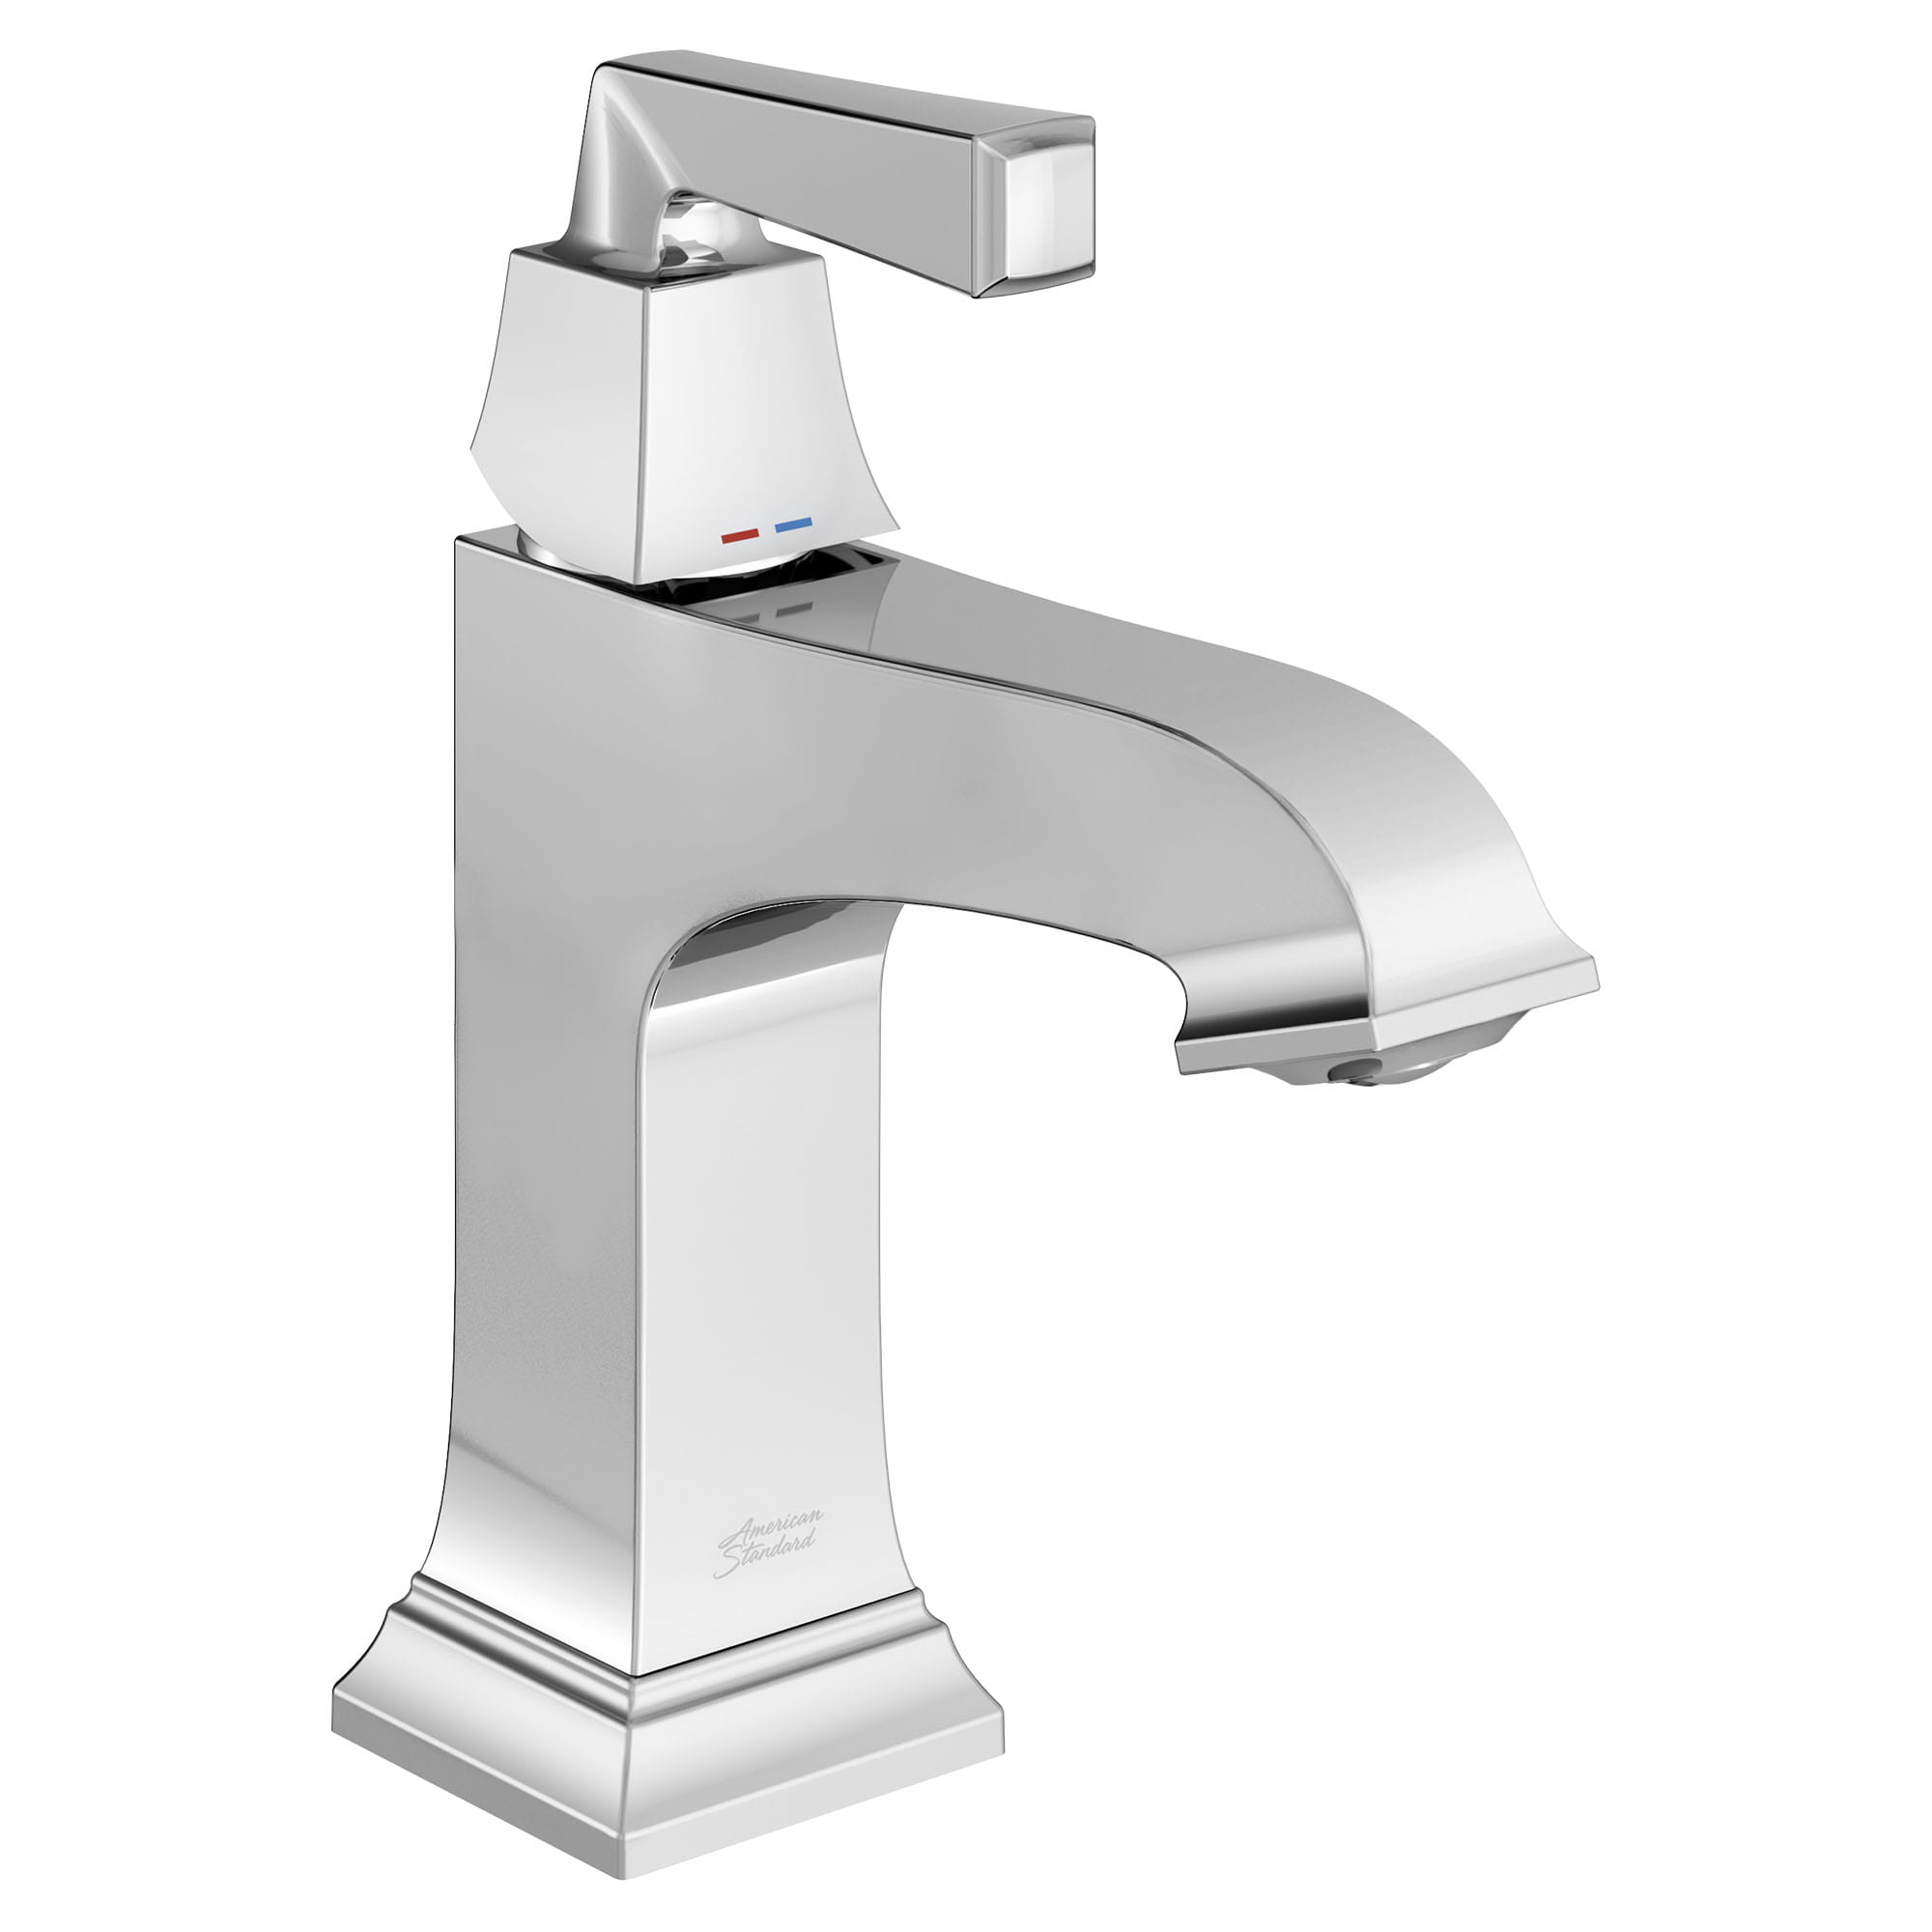 Town Square S Single Hole Single Handle Bathroom Faucet 12 gpm 45 L min With Lever Handle CHROME